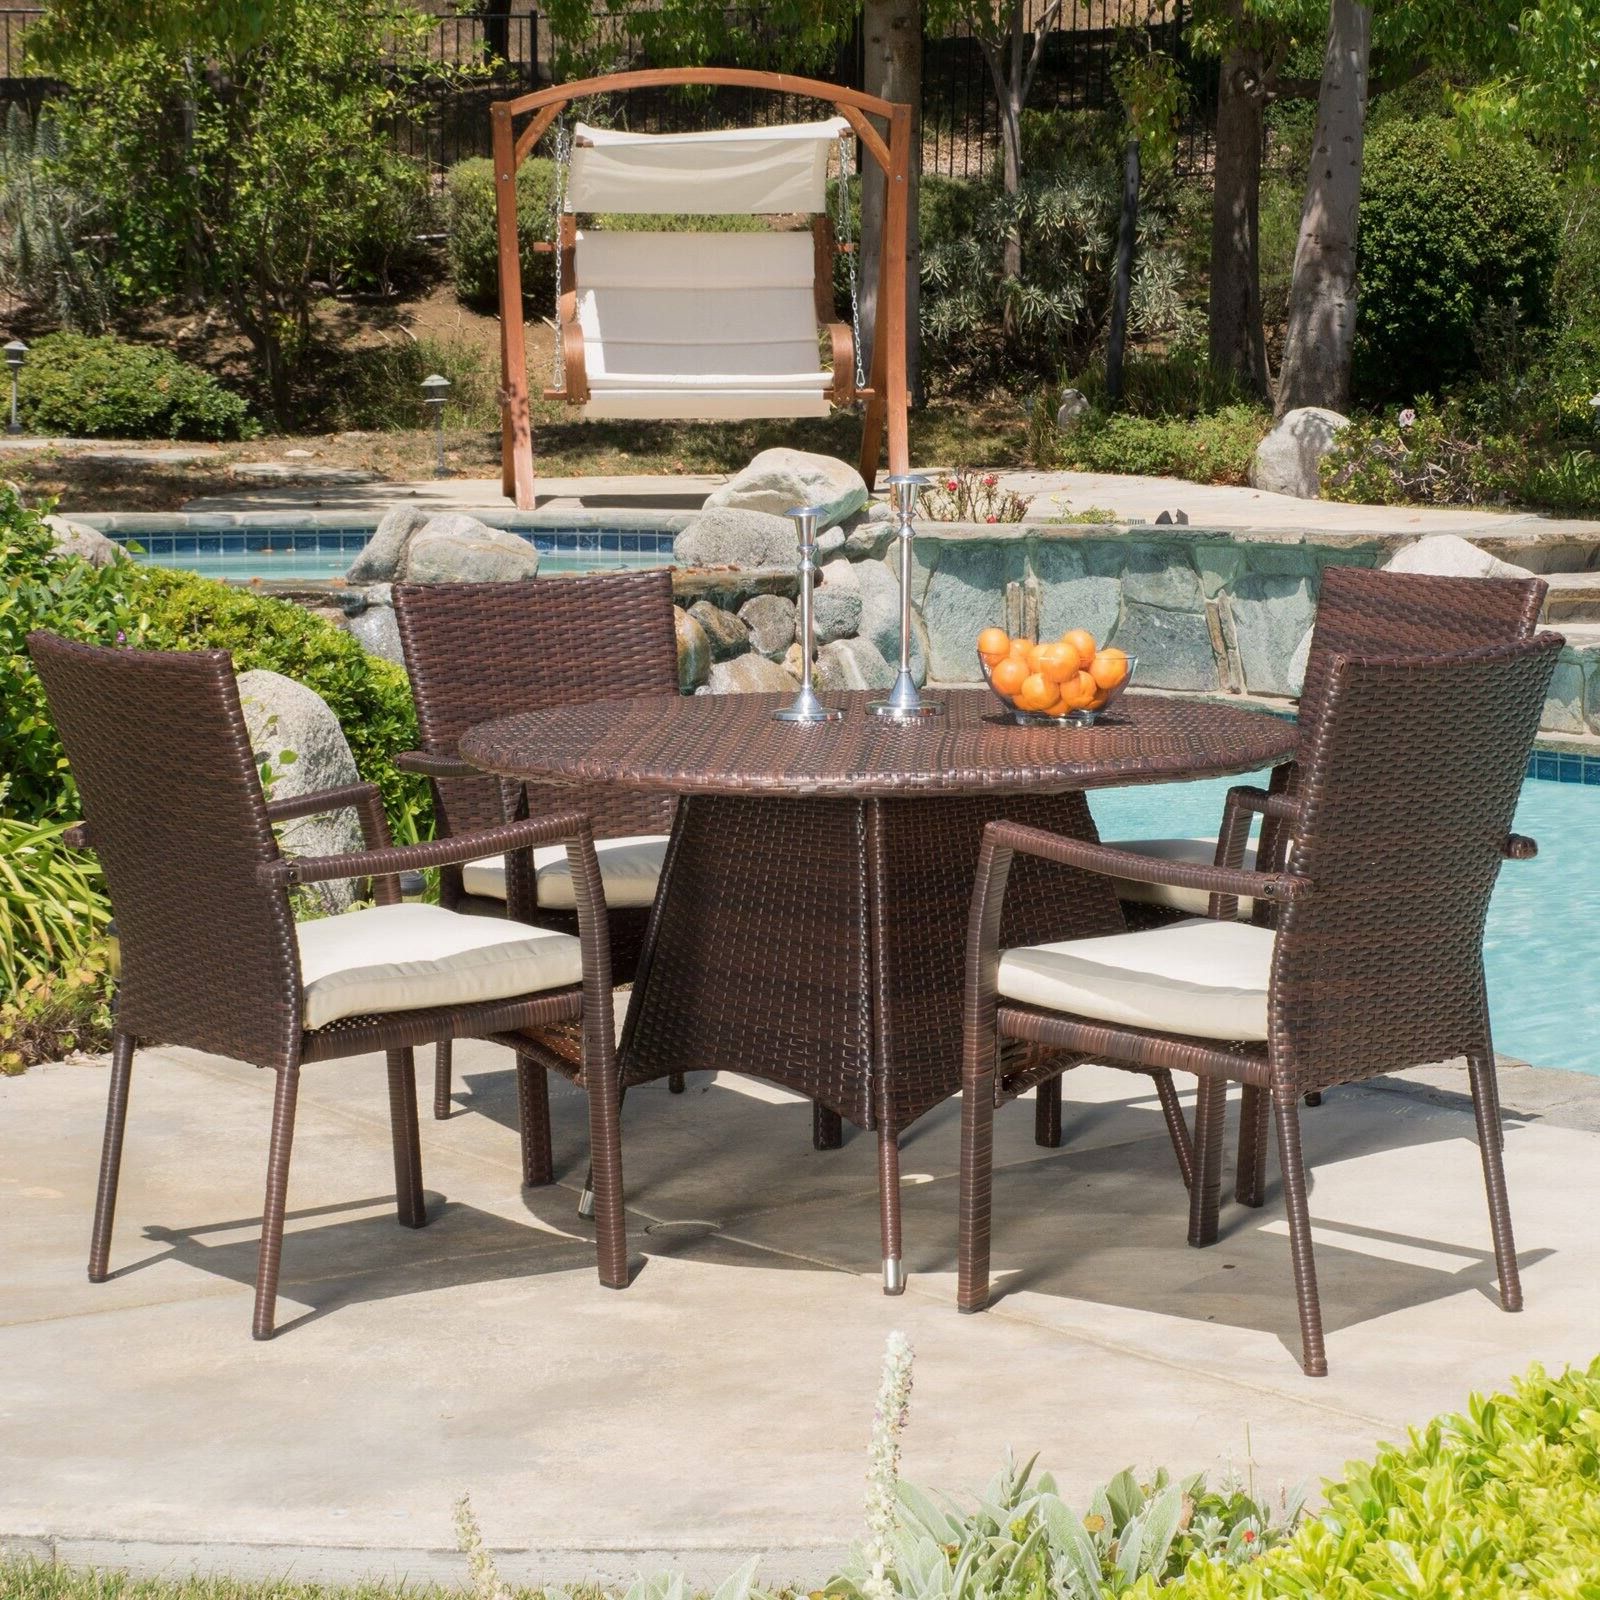 Wicker 5 Piece Round Patio Dining Sets Intended For Newest Vernon 5 Piece Wicker Patio Dining Set – Walmart – Walmart (View 13 of 15)